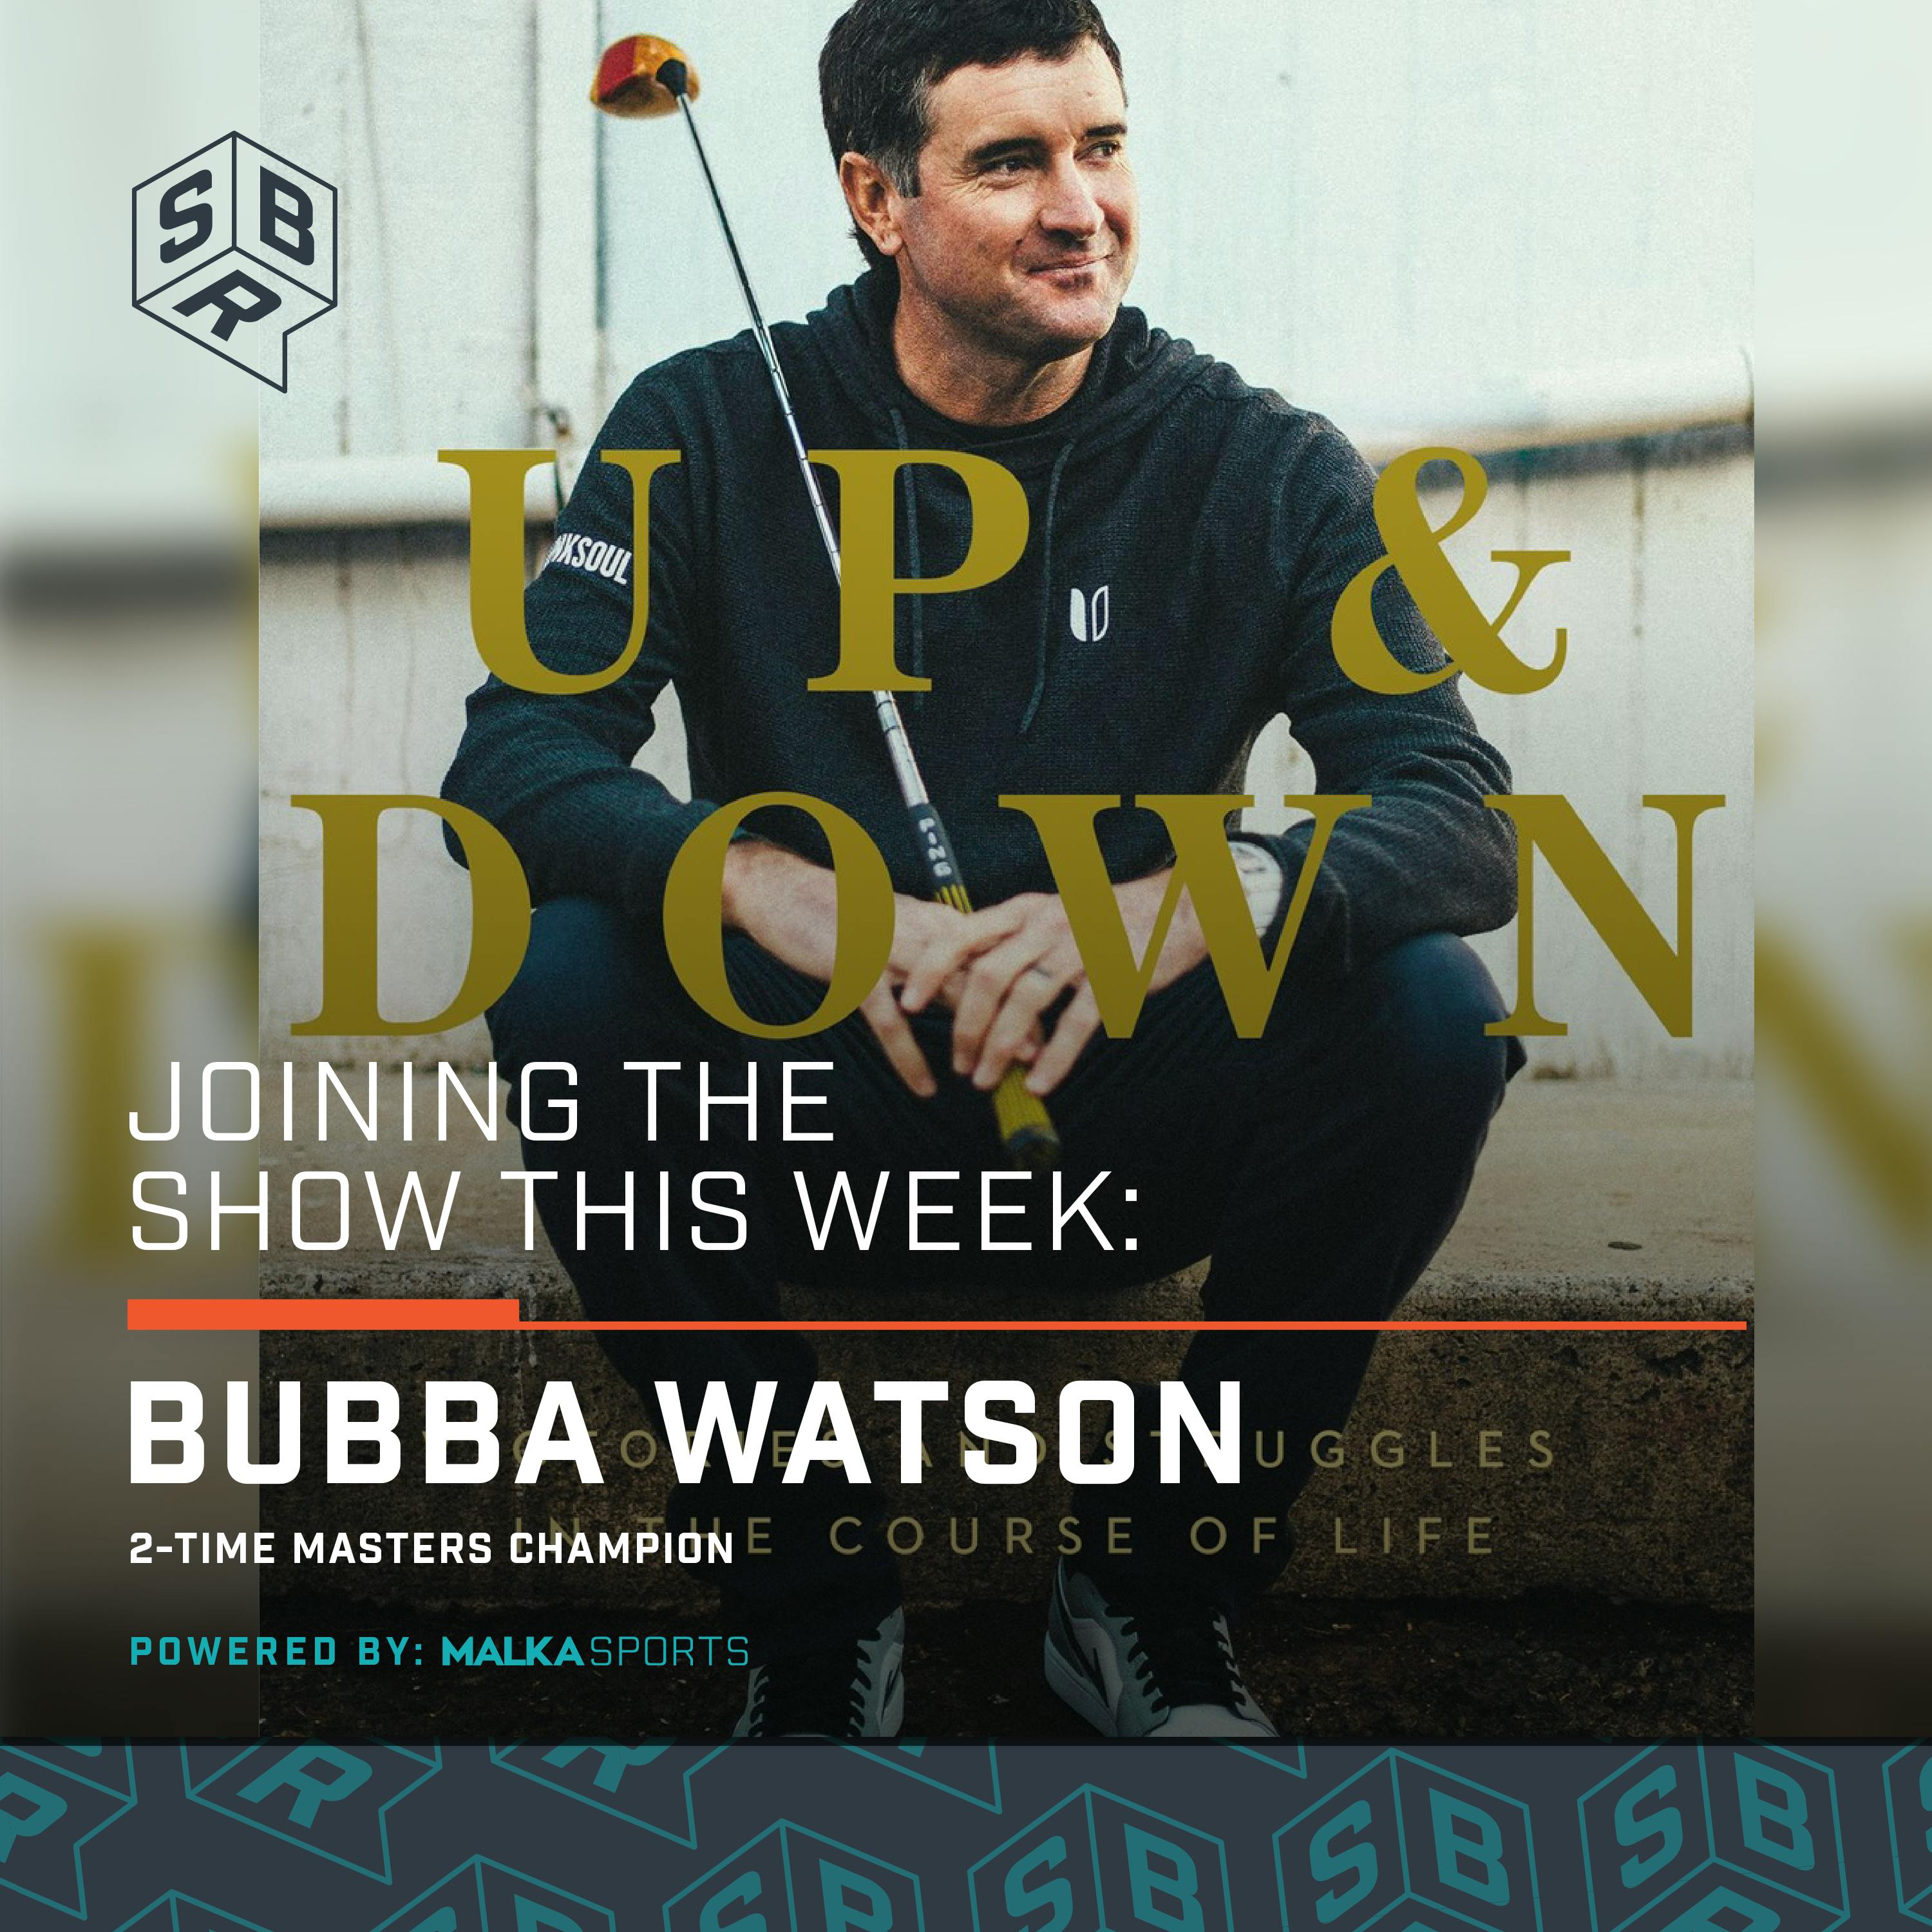 Bubba Watson, 2-Time Masters Champ & Author of the book 